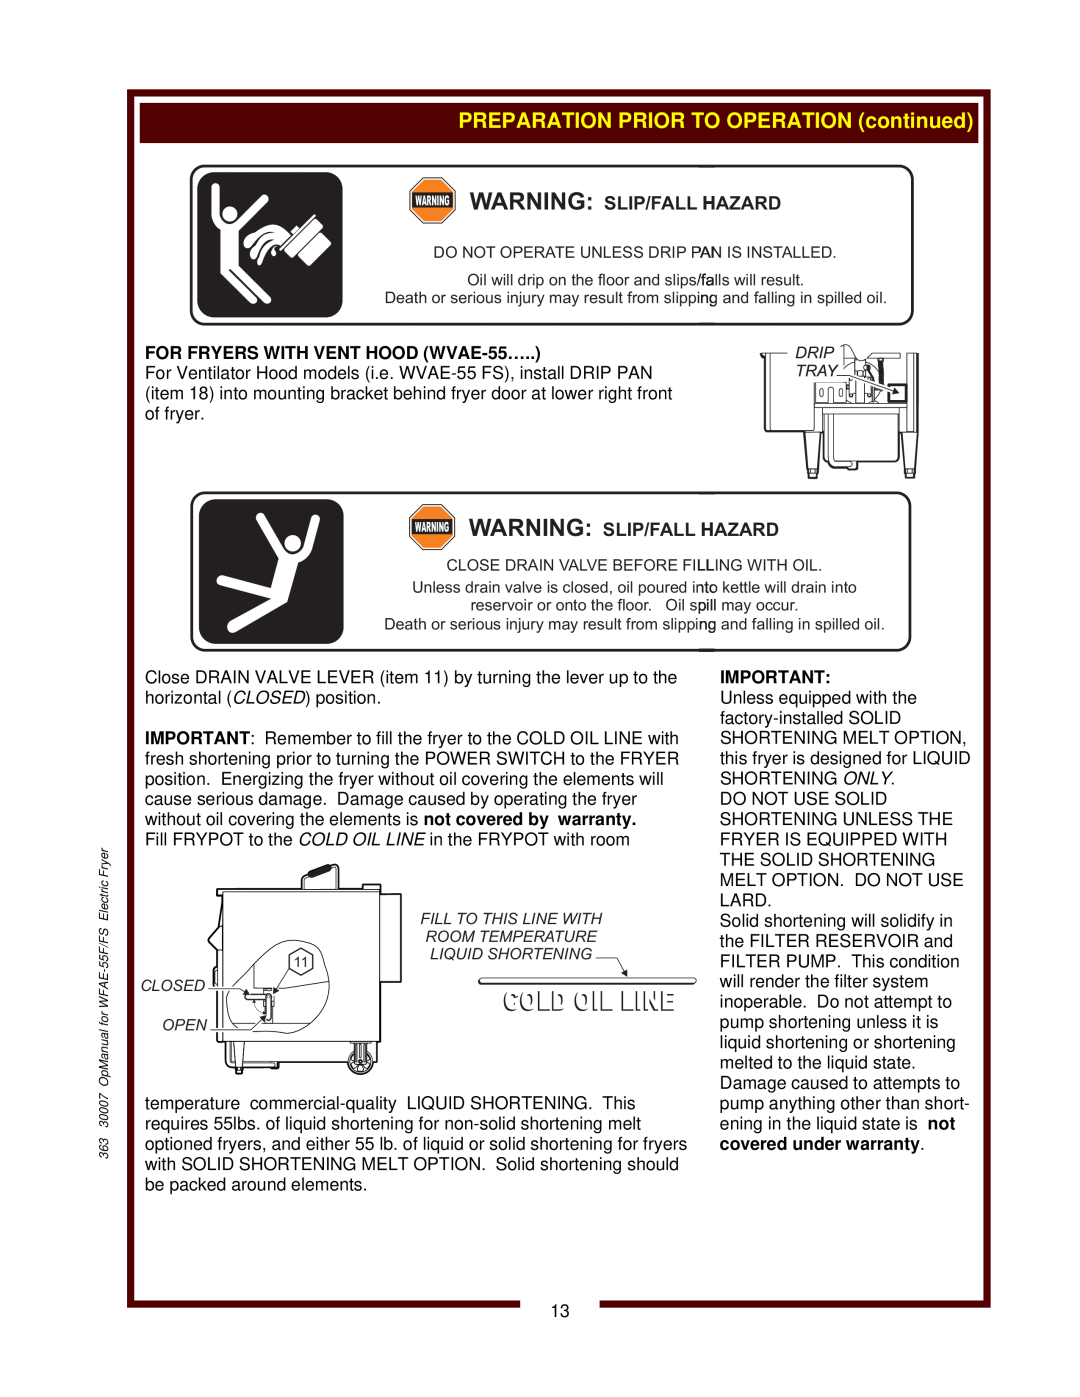 Bloomfield WFAE-55FS operation manual Warning Slip/Fall Hazard, FOR FRYERS WITH VENT HOOD WVAE-55…, Cold Oil Line 